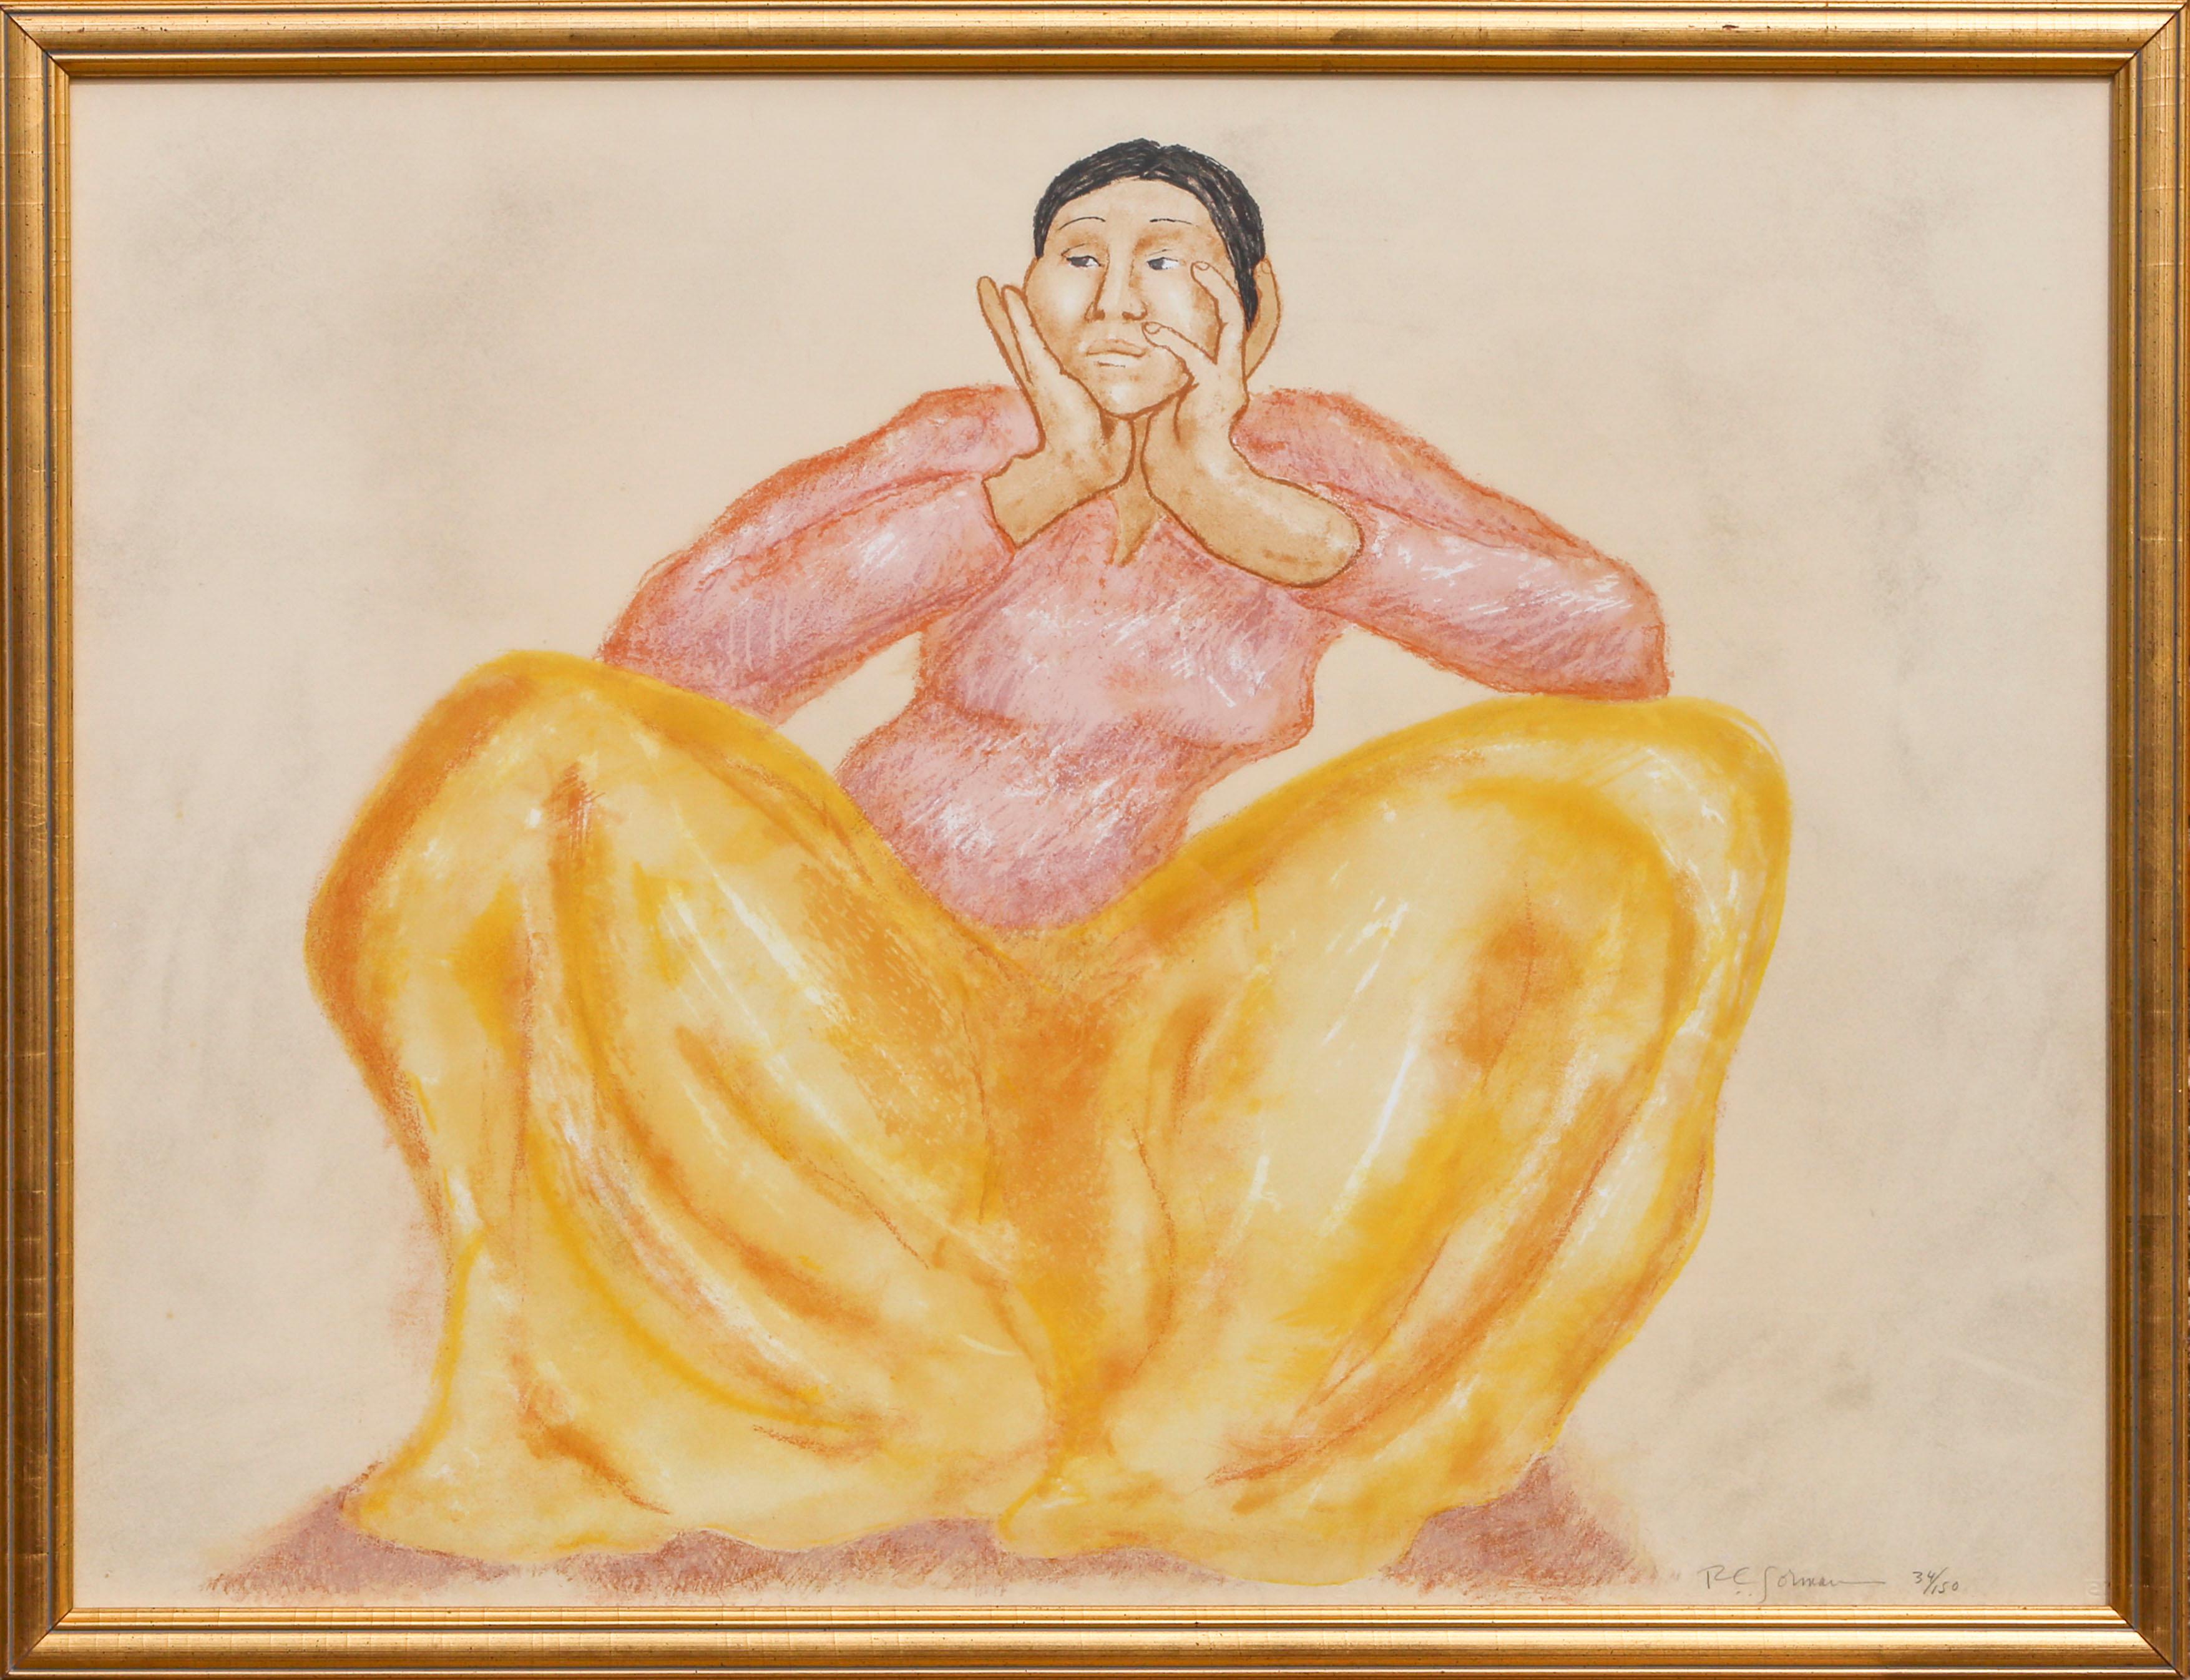 A woman in a pink shirt and yellow skirt crouches to fit within the frame of the image, her hands tenderly holding up her face as she looks off to the left. Gorman has caught this figure mid-moment, perhaps either at a downbeat during a dance or